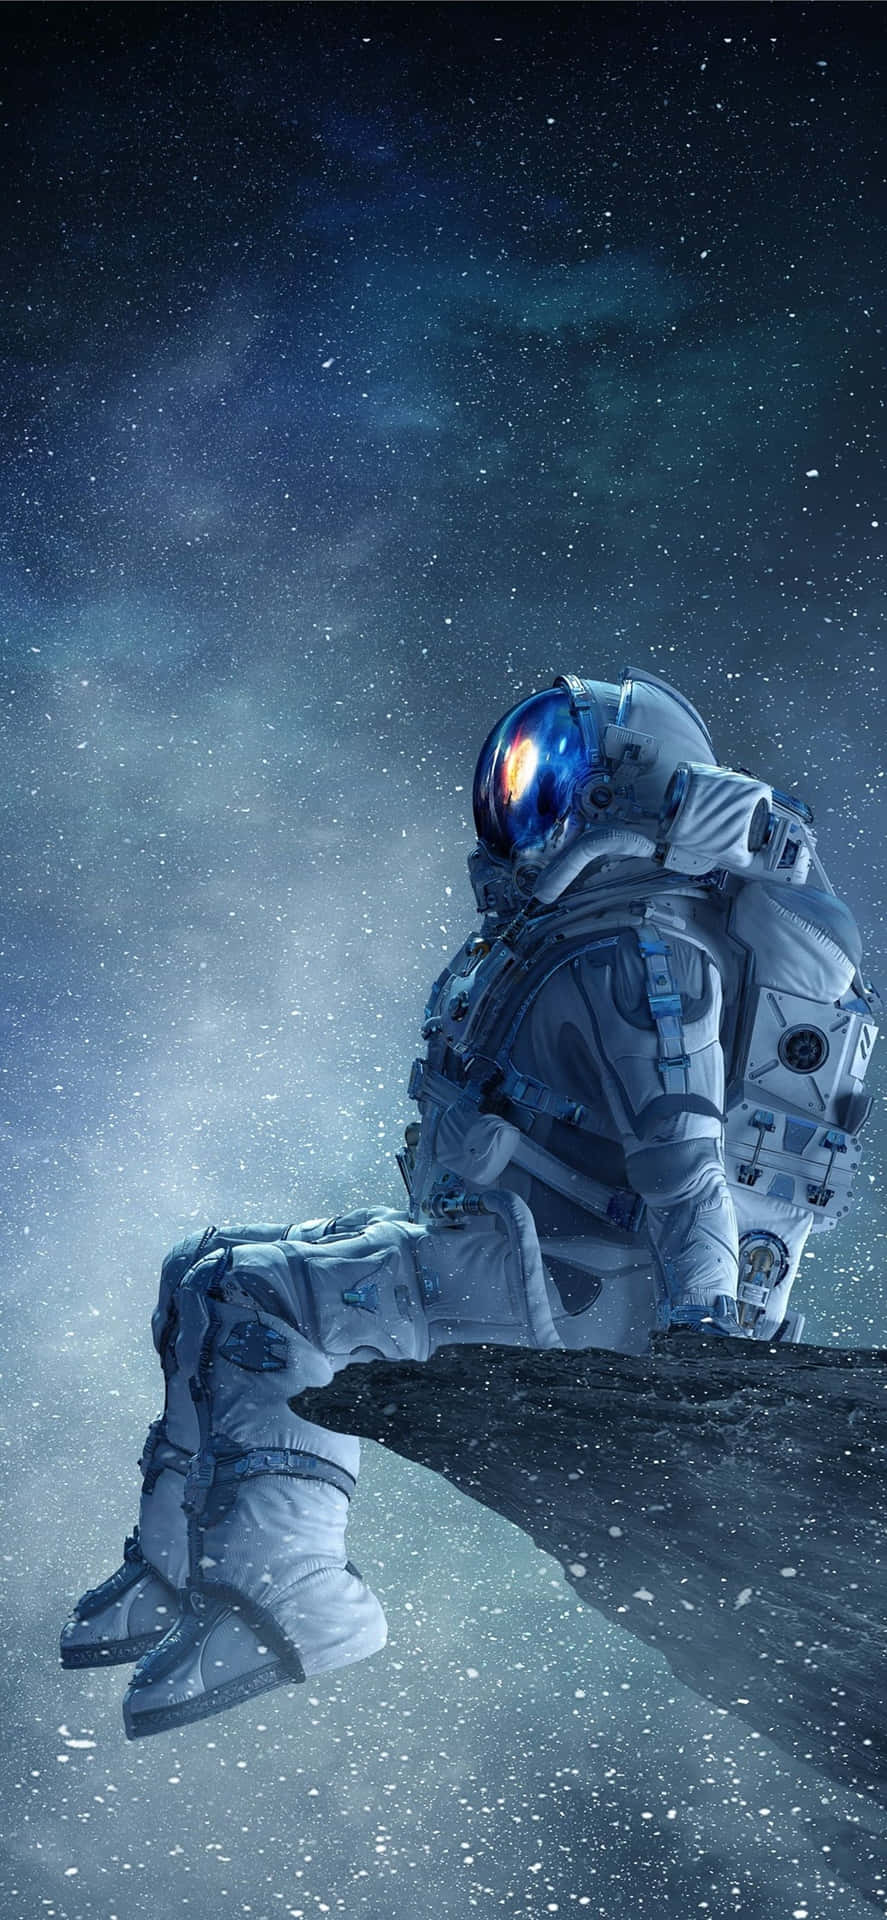 Astronaut Resting In The Trippy Galaxy Wallpaper